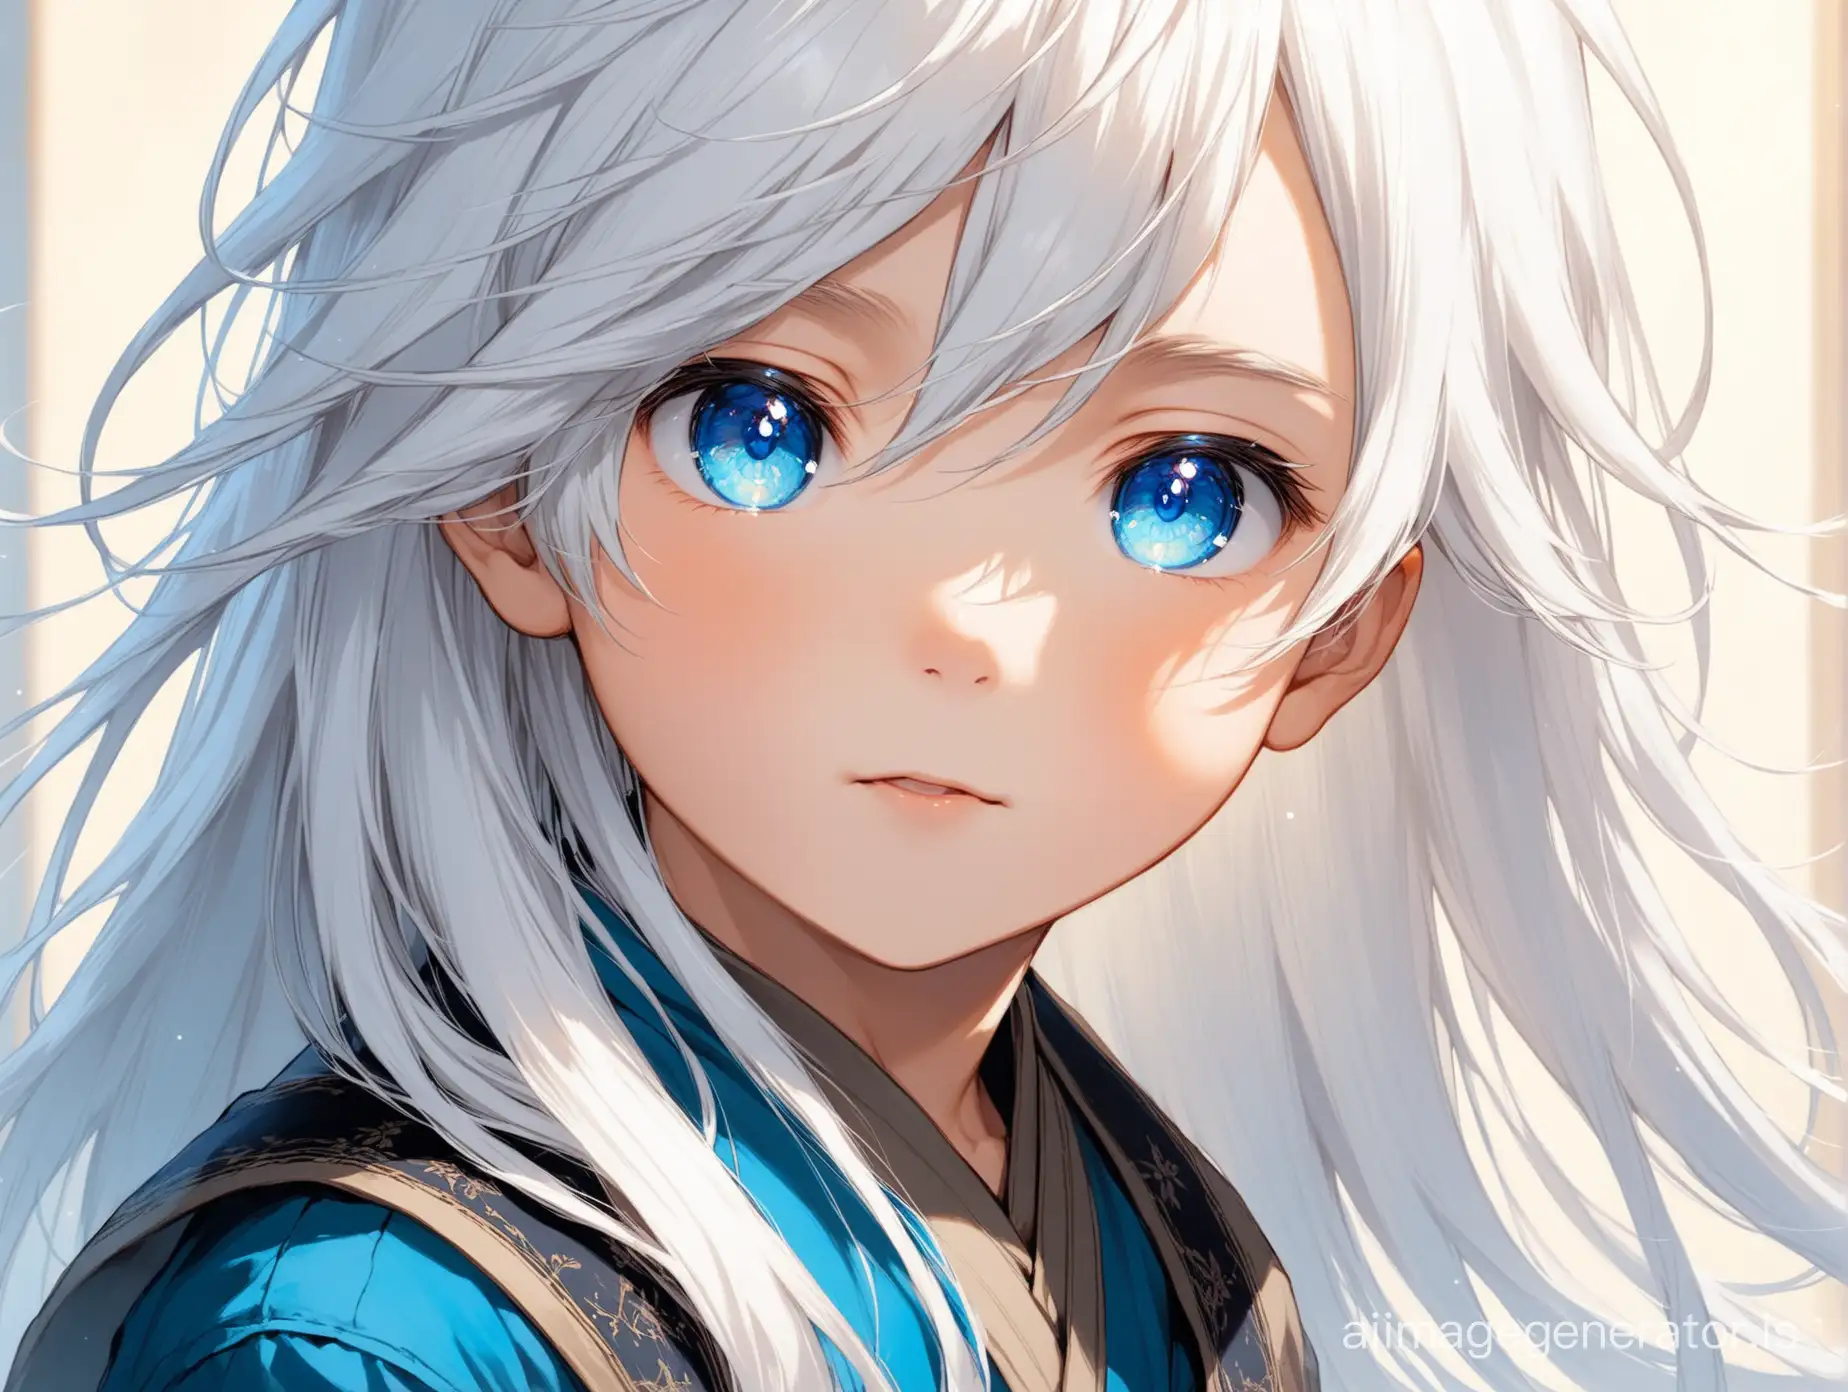 Adorable-Little-Boy-with-Long-White-Hair-and-Blue-Eyes